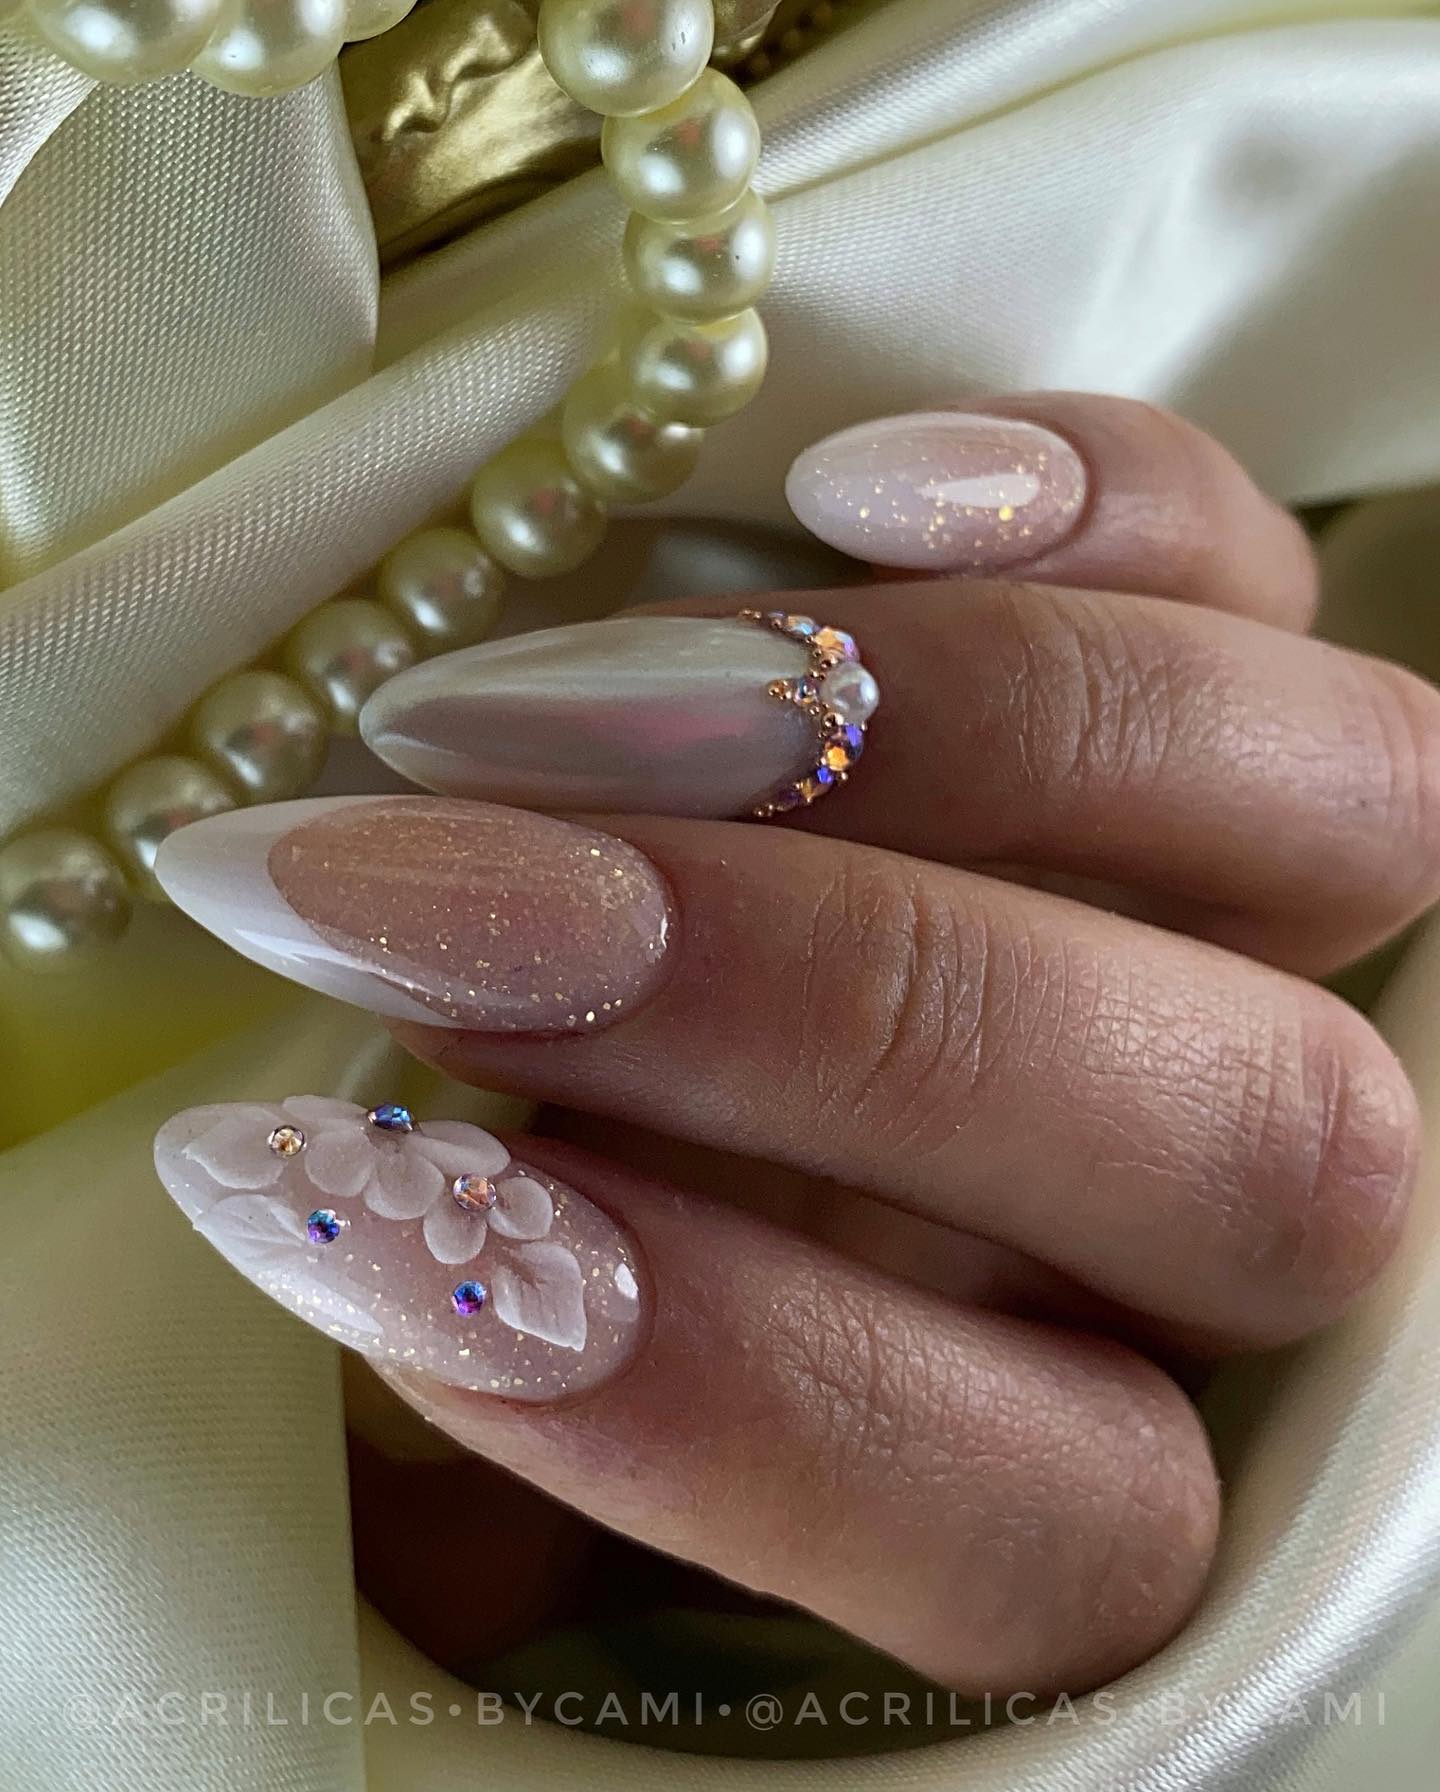 You will be on the spotlight on your wedding day, so your nails will, too. Highly decorated wedding nails are here to make you feel like a princess. Shiny and glittered nail polish looks amazing when it is matched with some stones and flowers.